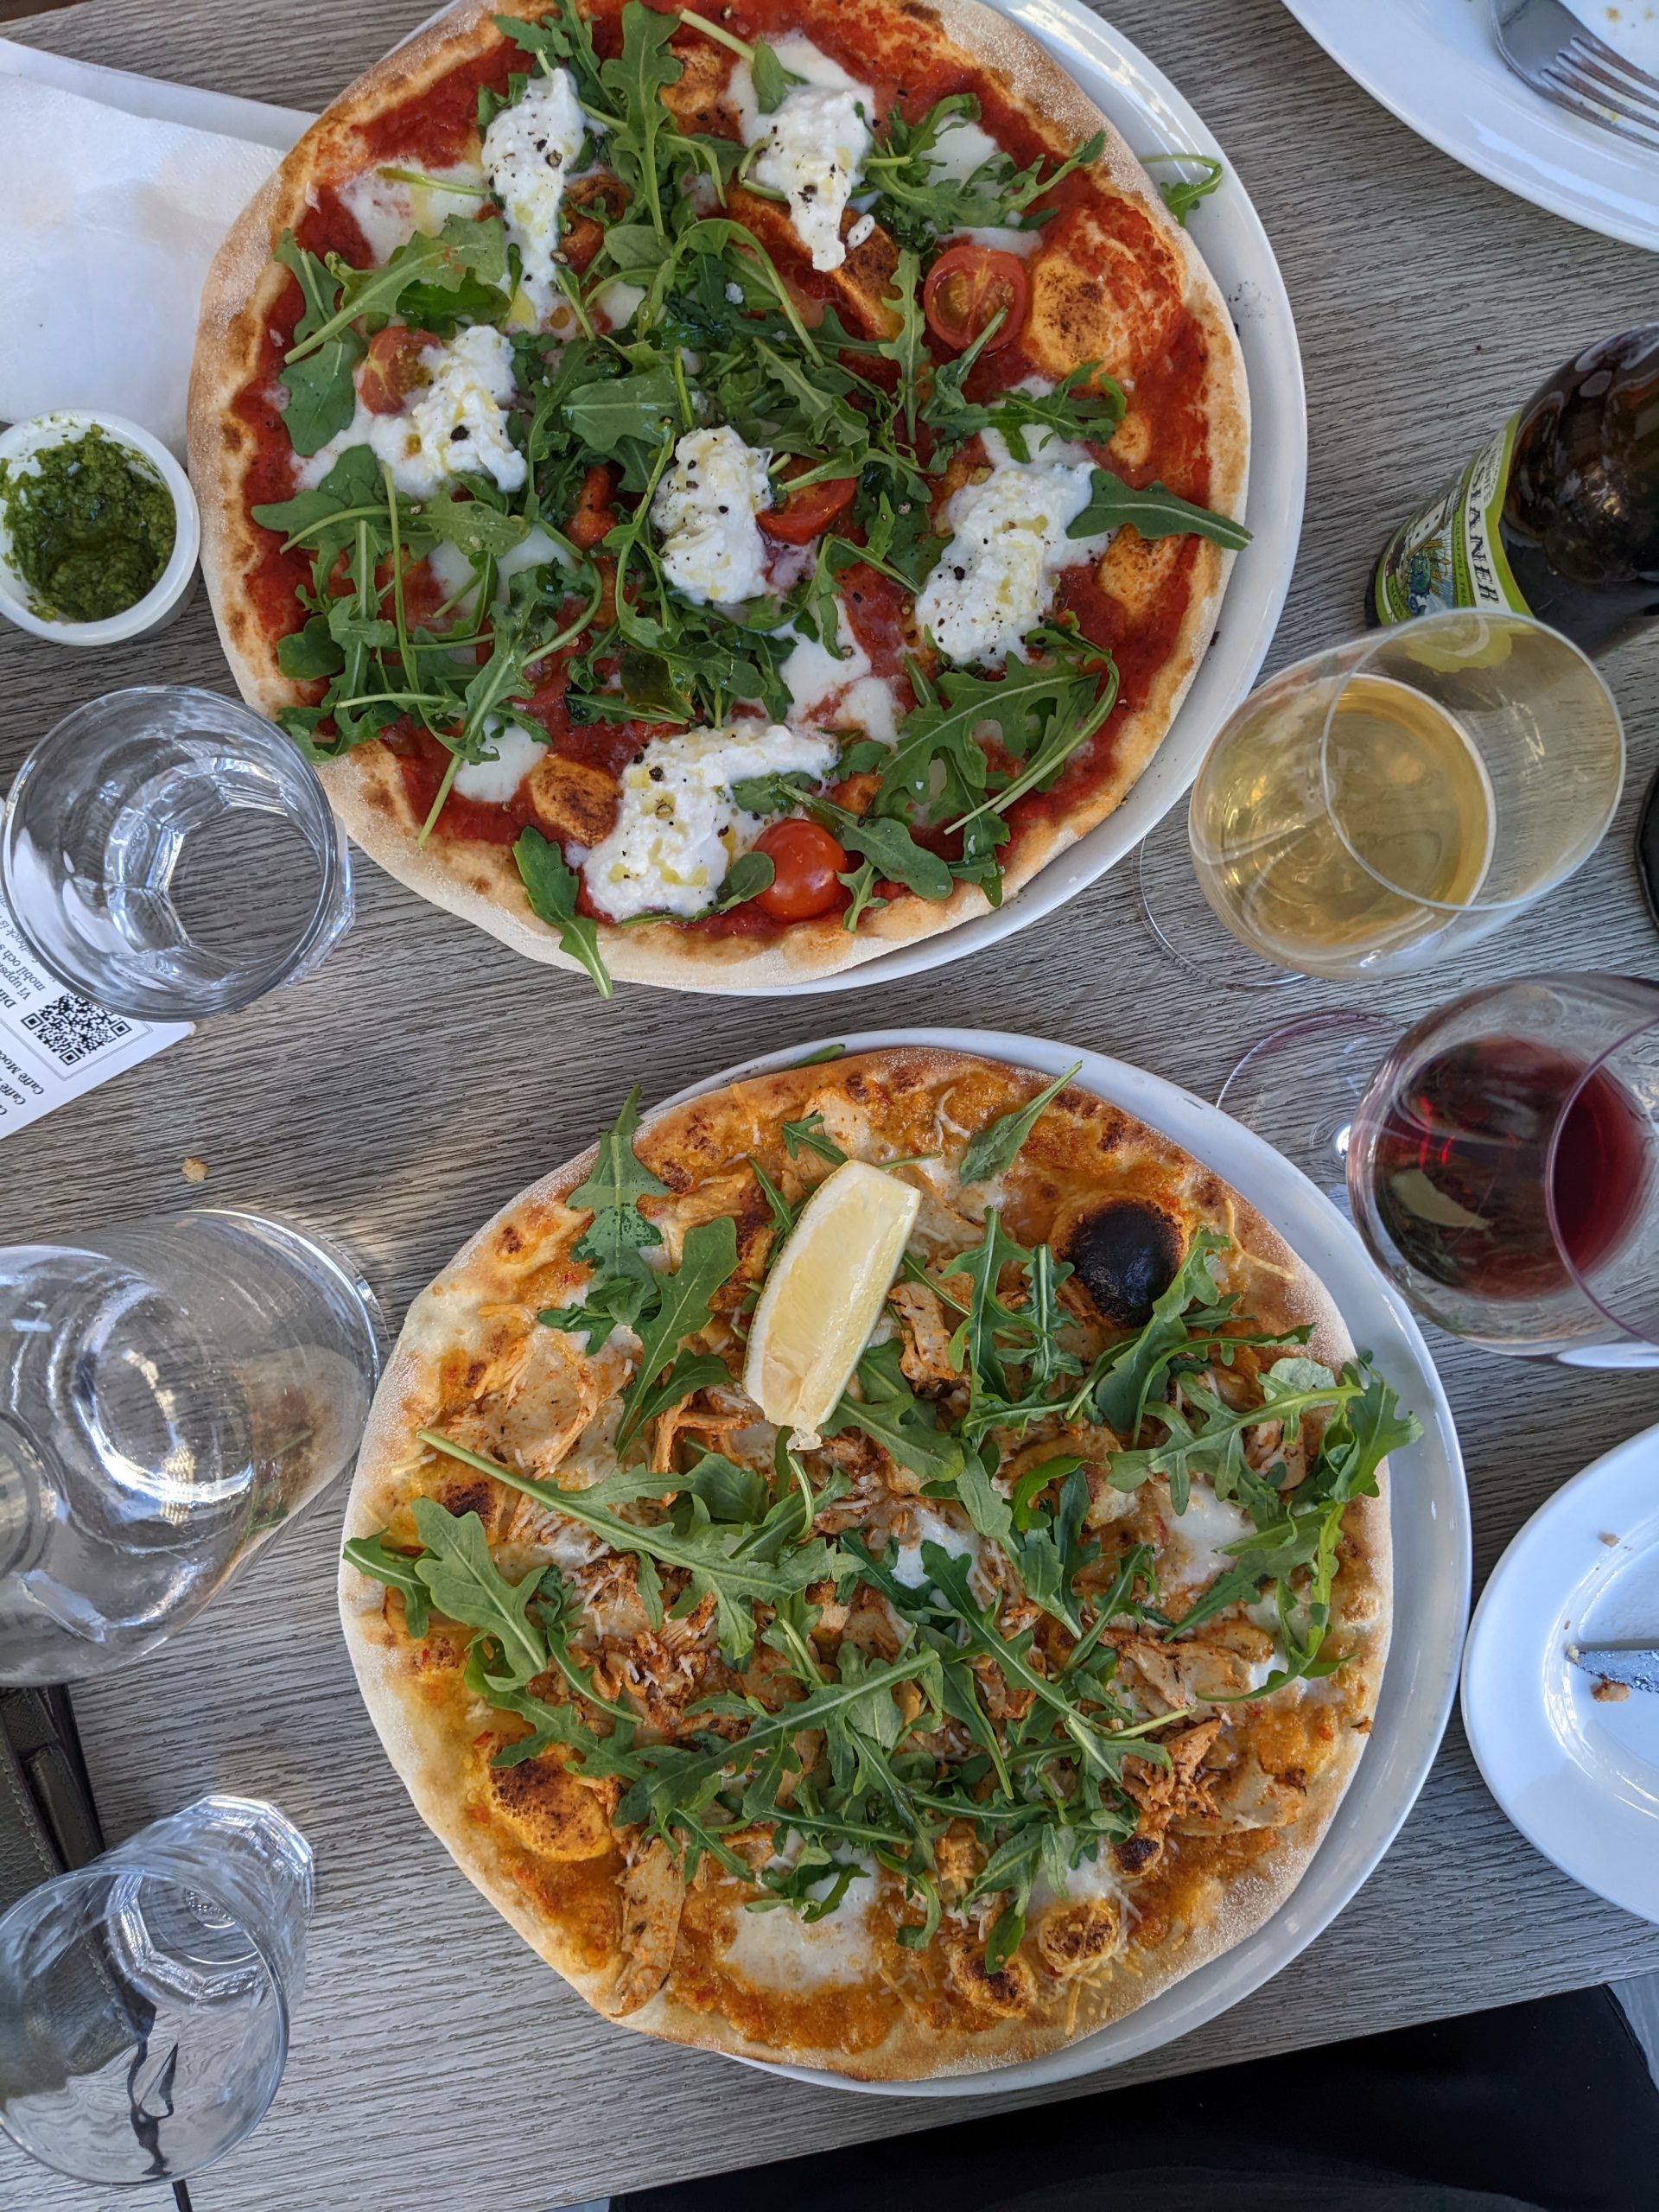 Two pizzas on top of a table surrounded by drinks